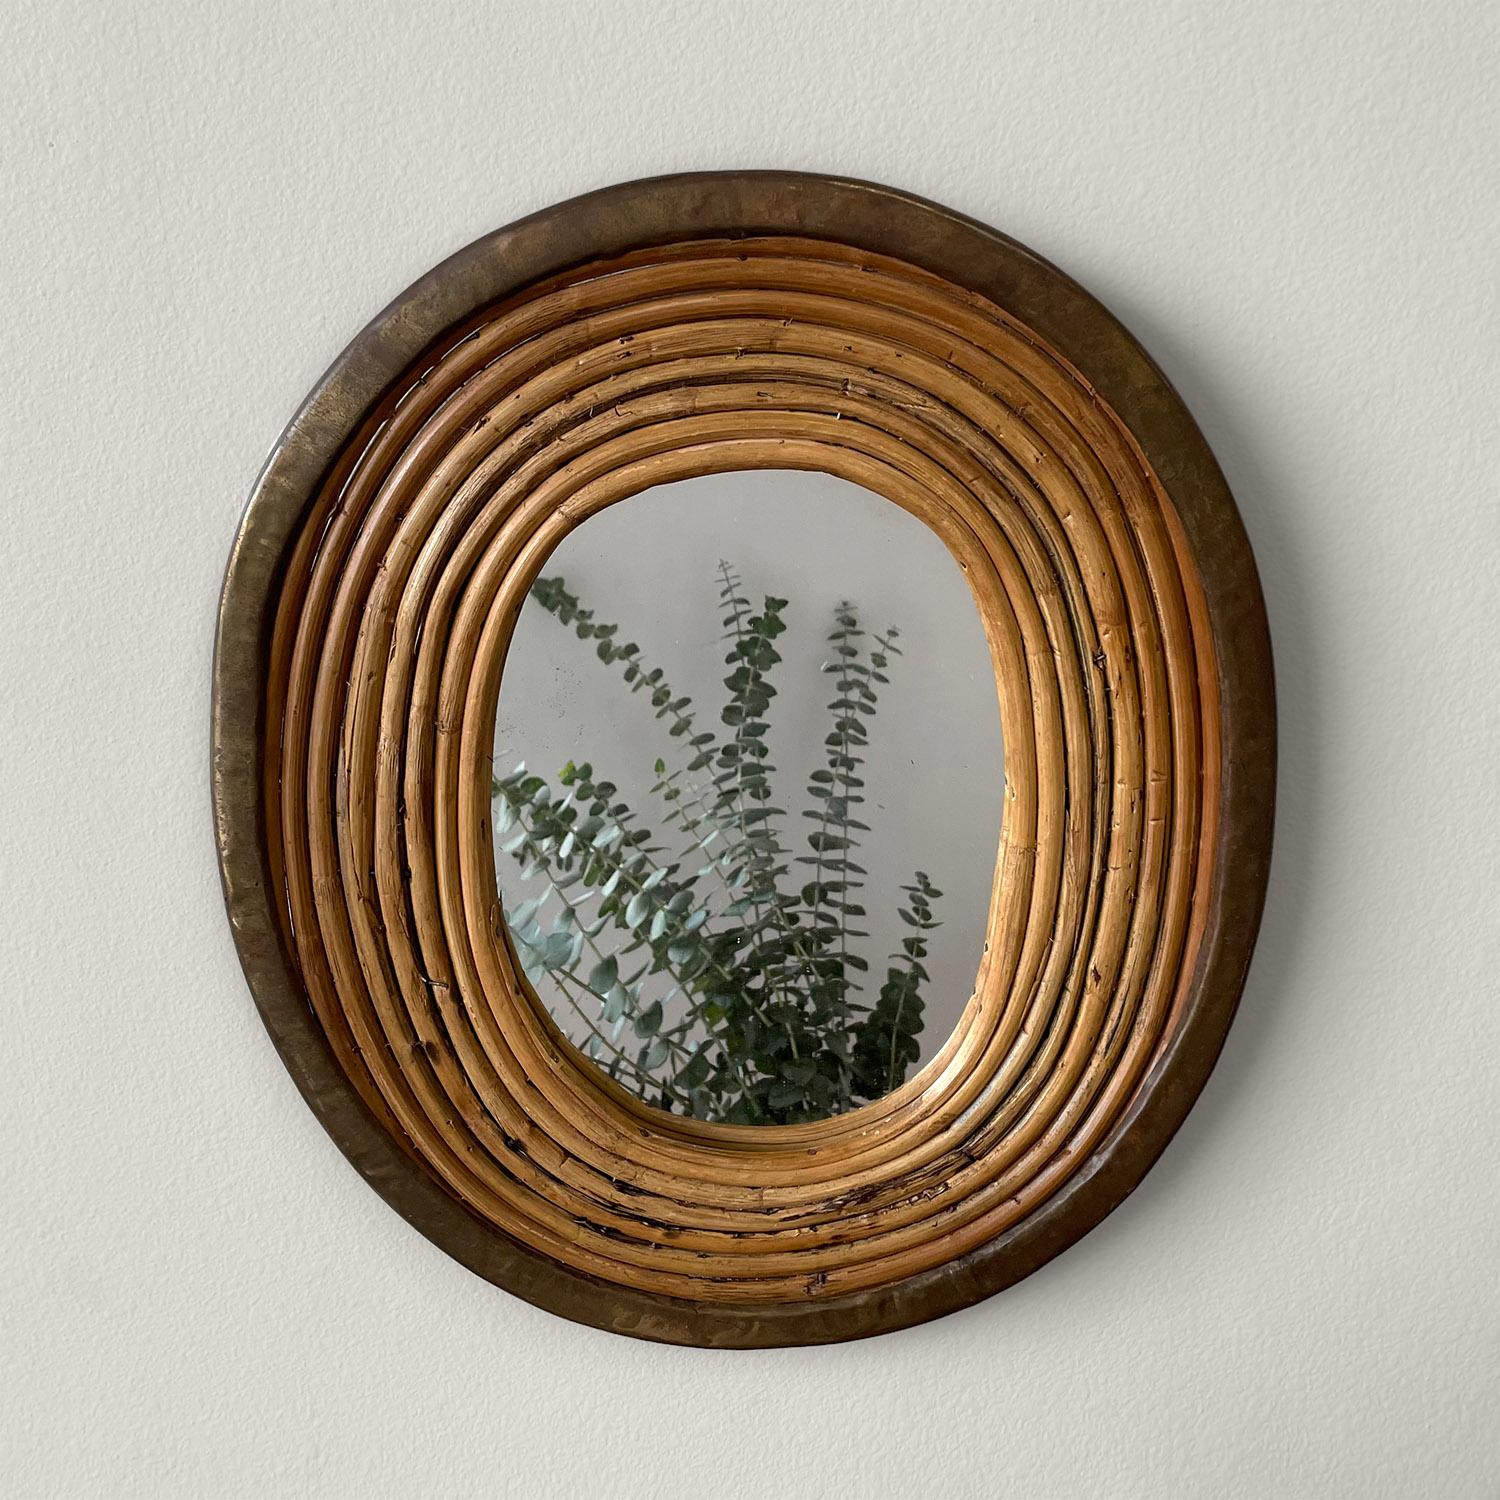 Italian rattan & brass mirror
Italy, circa 1970’s
Coiled rattan frame with aged brass trim
Original oval mirror has light surface markings
Patina from age and use
Perfectly imperfect

OAD: 14.5” H x 12.625” W x .625” D
Mirror: 8.5” H x 6.375”